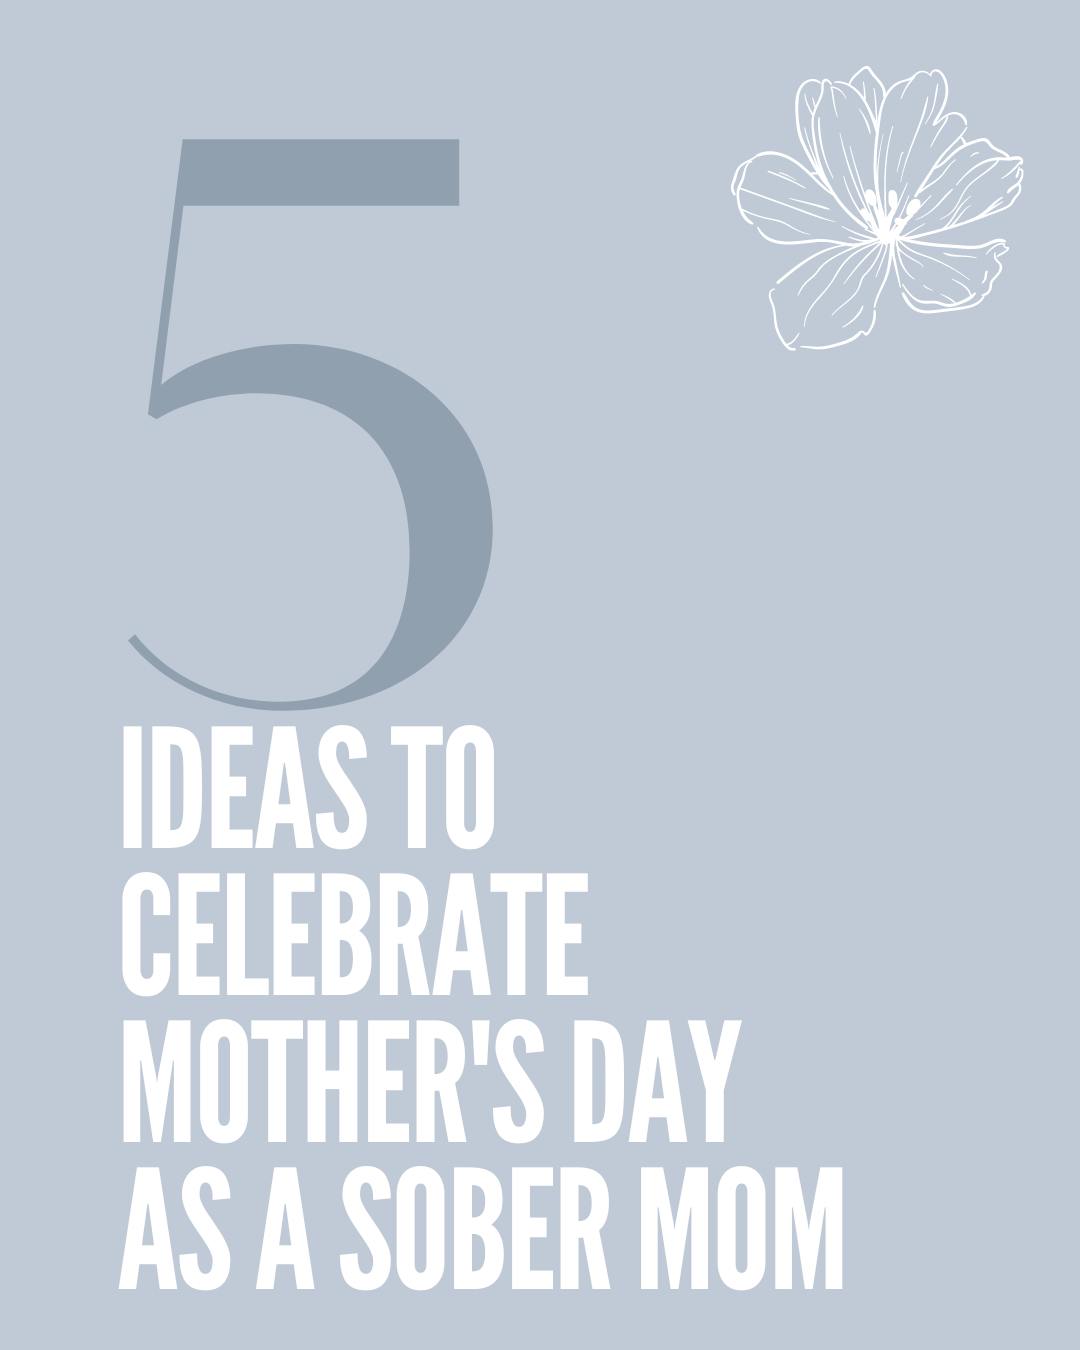 5 ideas to celebrate Mother's Day as a Sober Mom